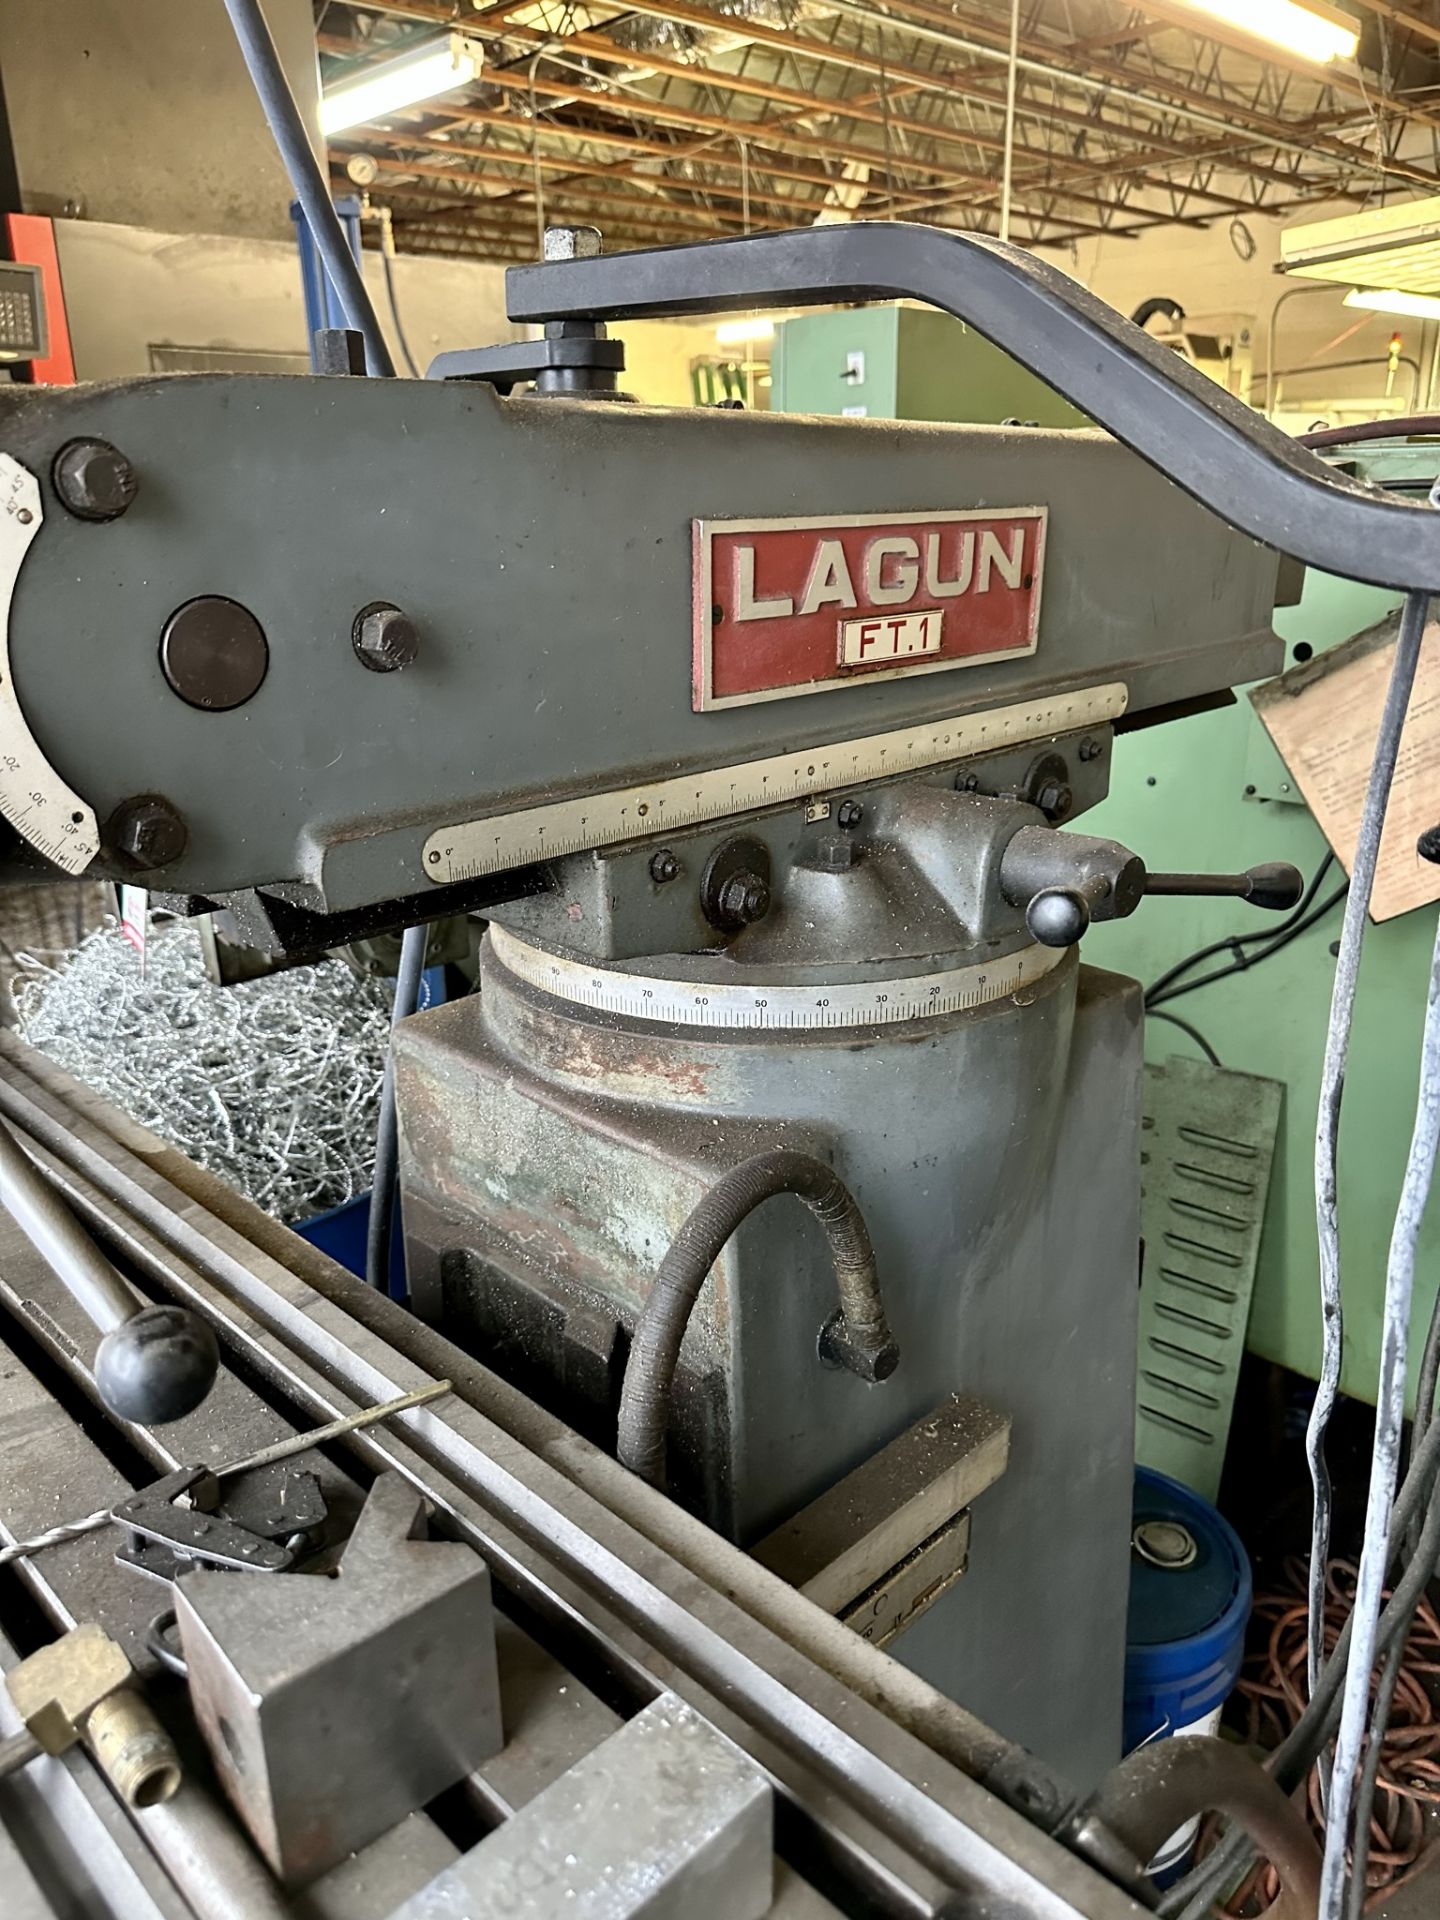 LAGUN FT.1 VERTICAL MILL, XY DRO, POWER FEED, 9" X 42" TABLE - Image 6 of 7